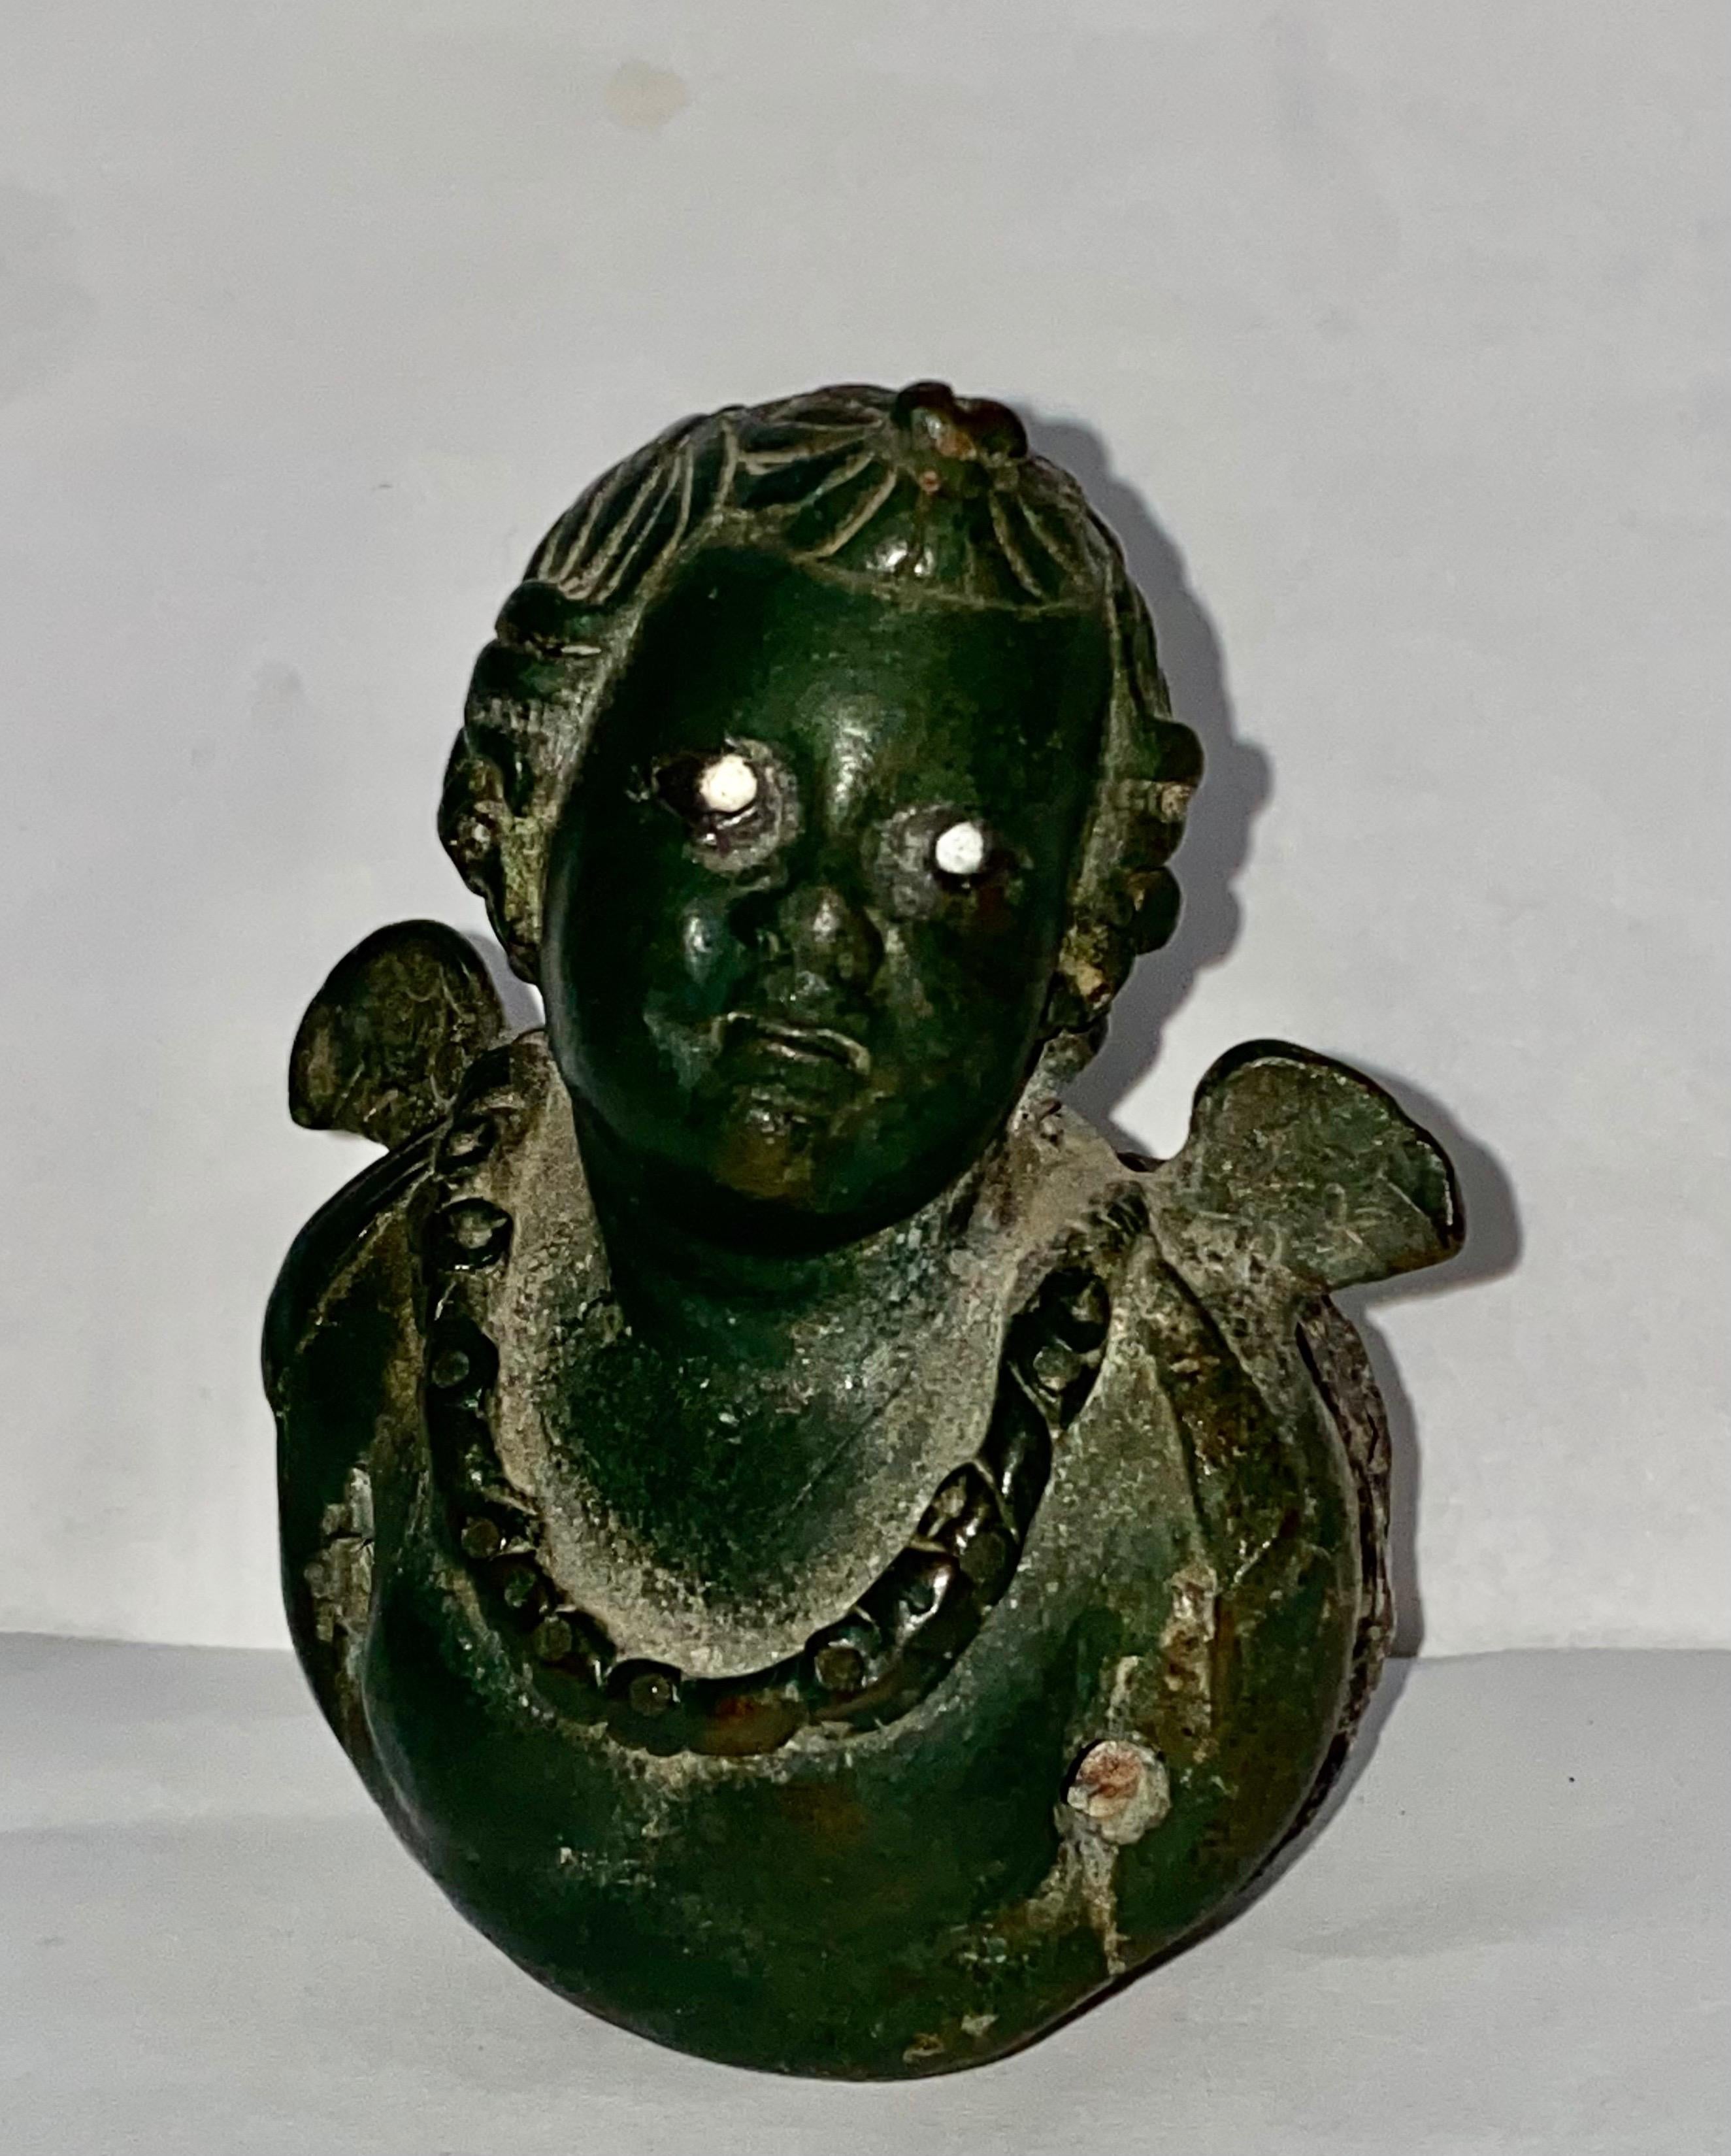 Rome, Imperial Period, ca. 1st century CE. An elegant bronze and lead steelyard weight depicting a Cherub with wings, shown wearing a chain around his neck and with white eyes. with his wavy hair fantastically styled into twists that wraps around